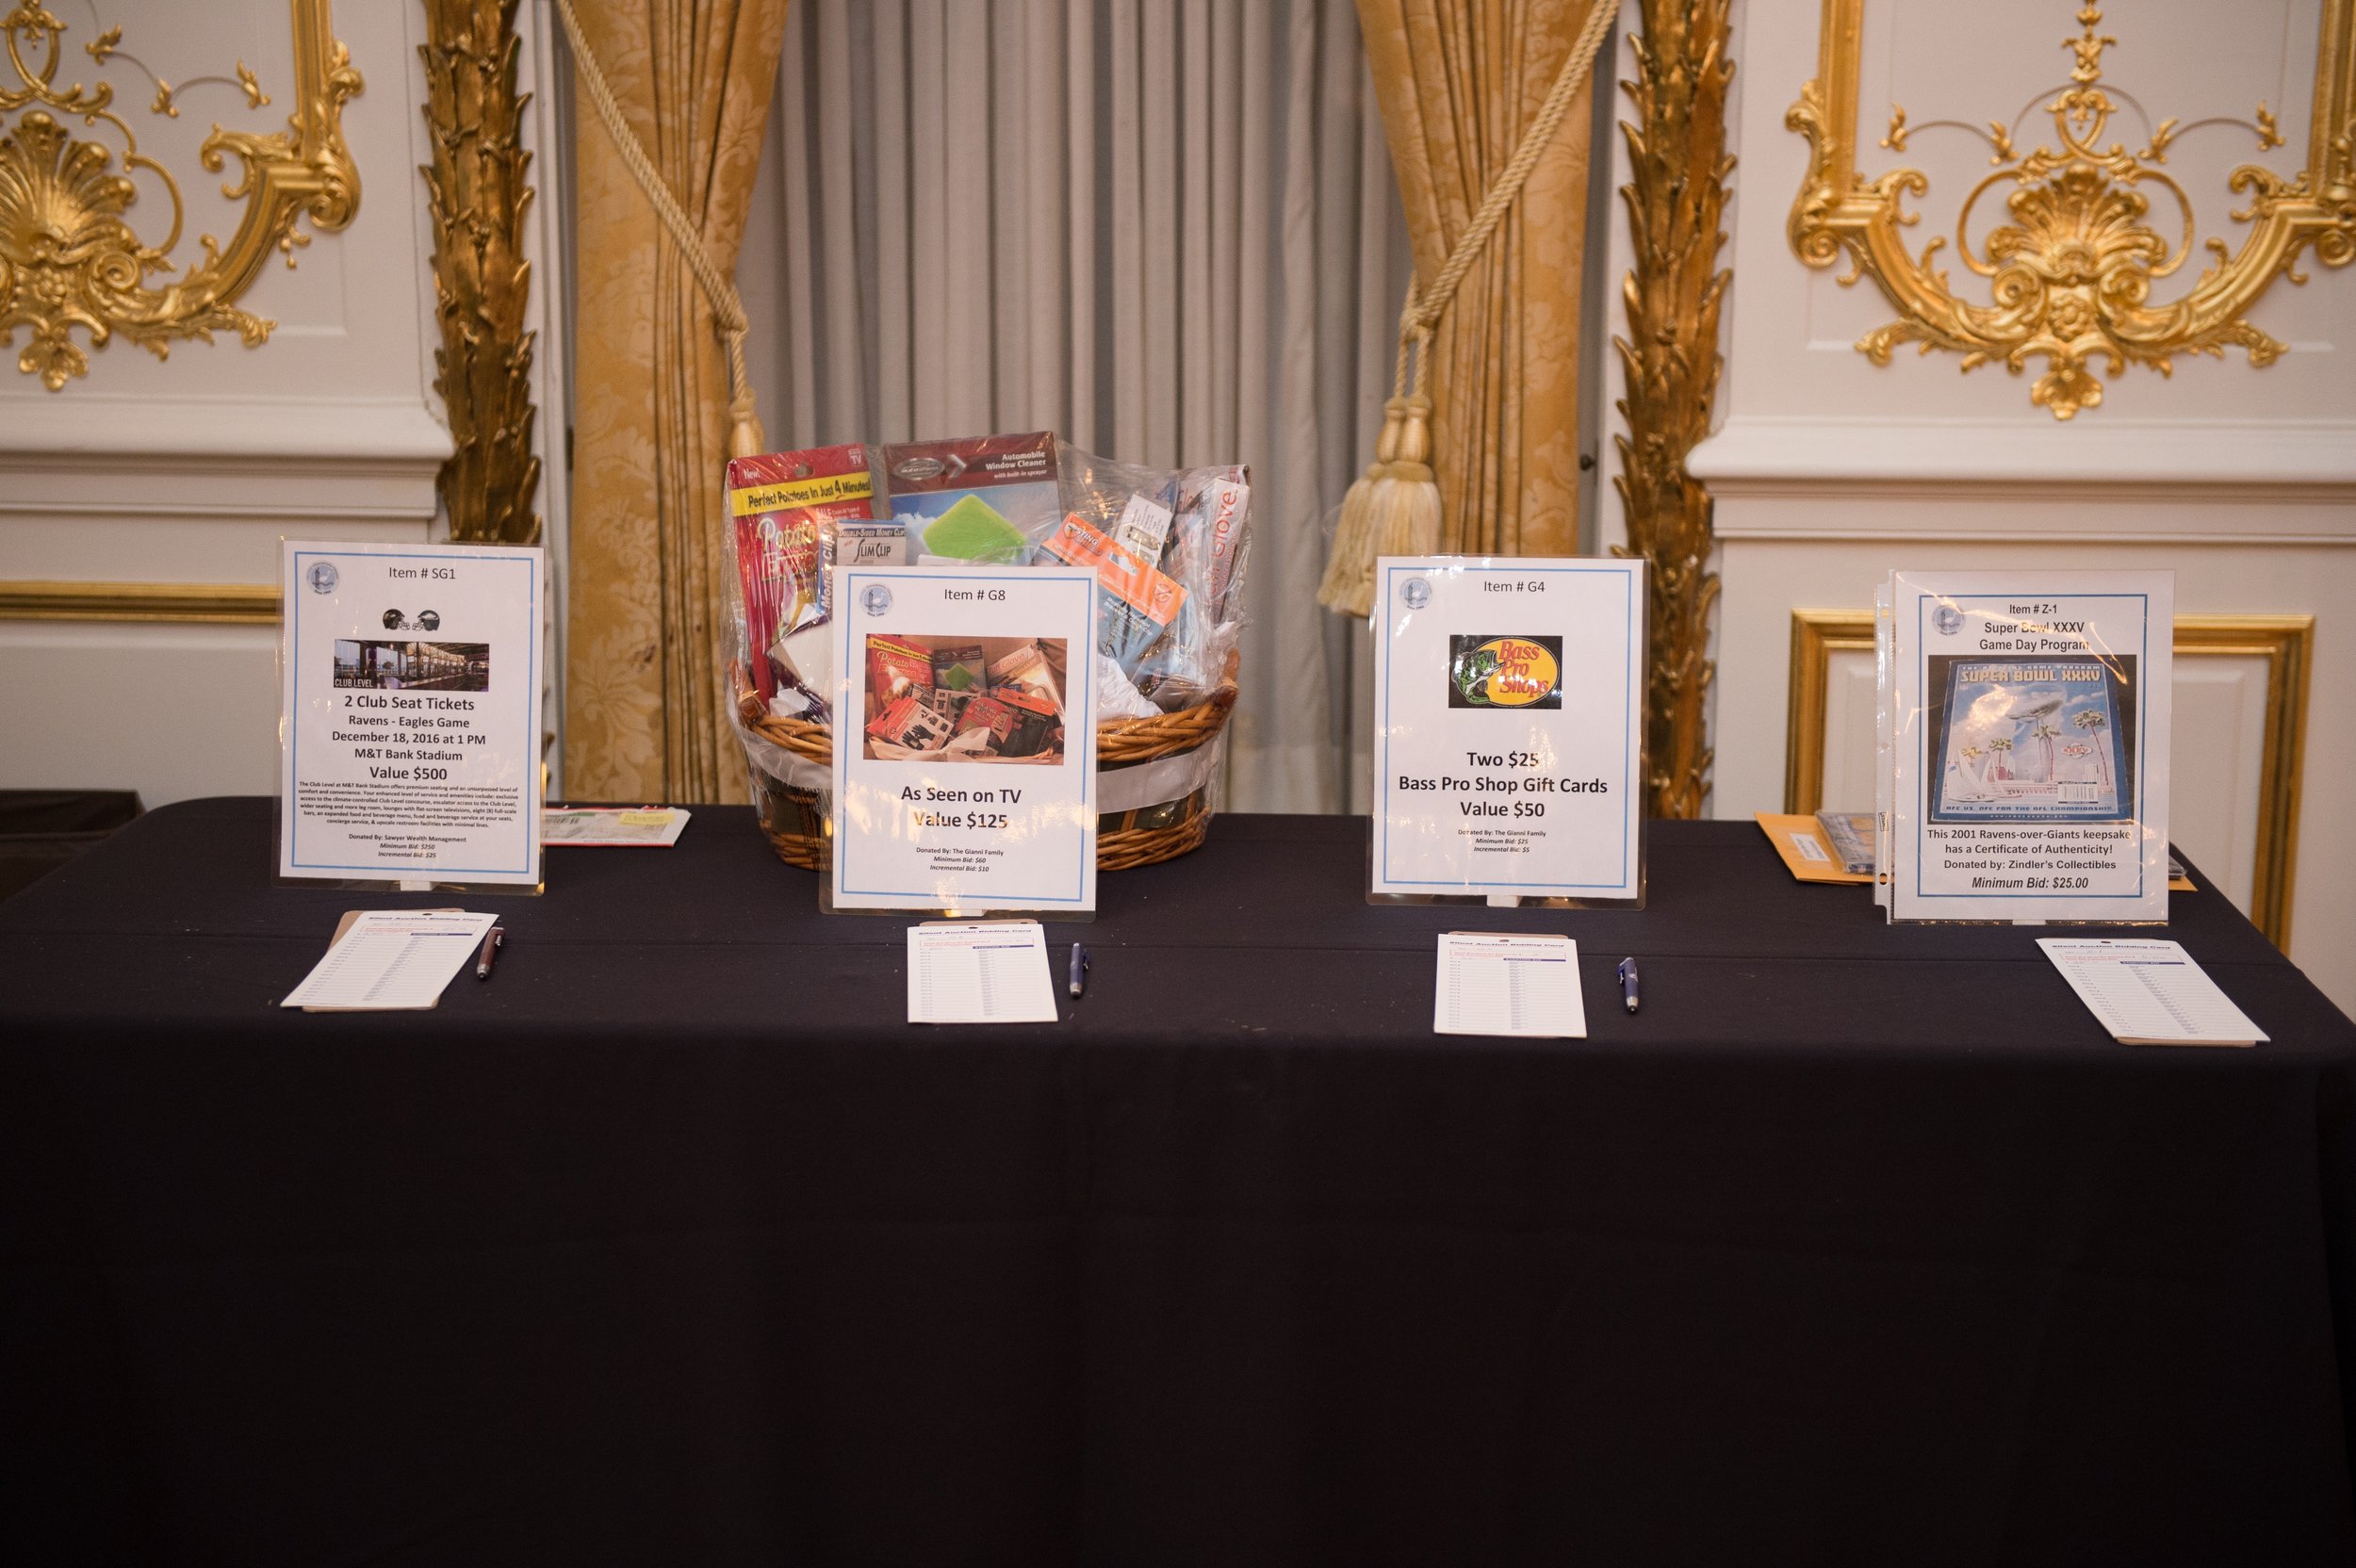 Items available at the Silent Auction included Ravens Tickets, an “As Seen on TV” Gift Basket, Bass Pro Shop Gift Cards, and a Super Bowl Game Day Program 